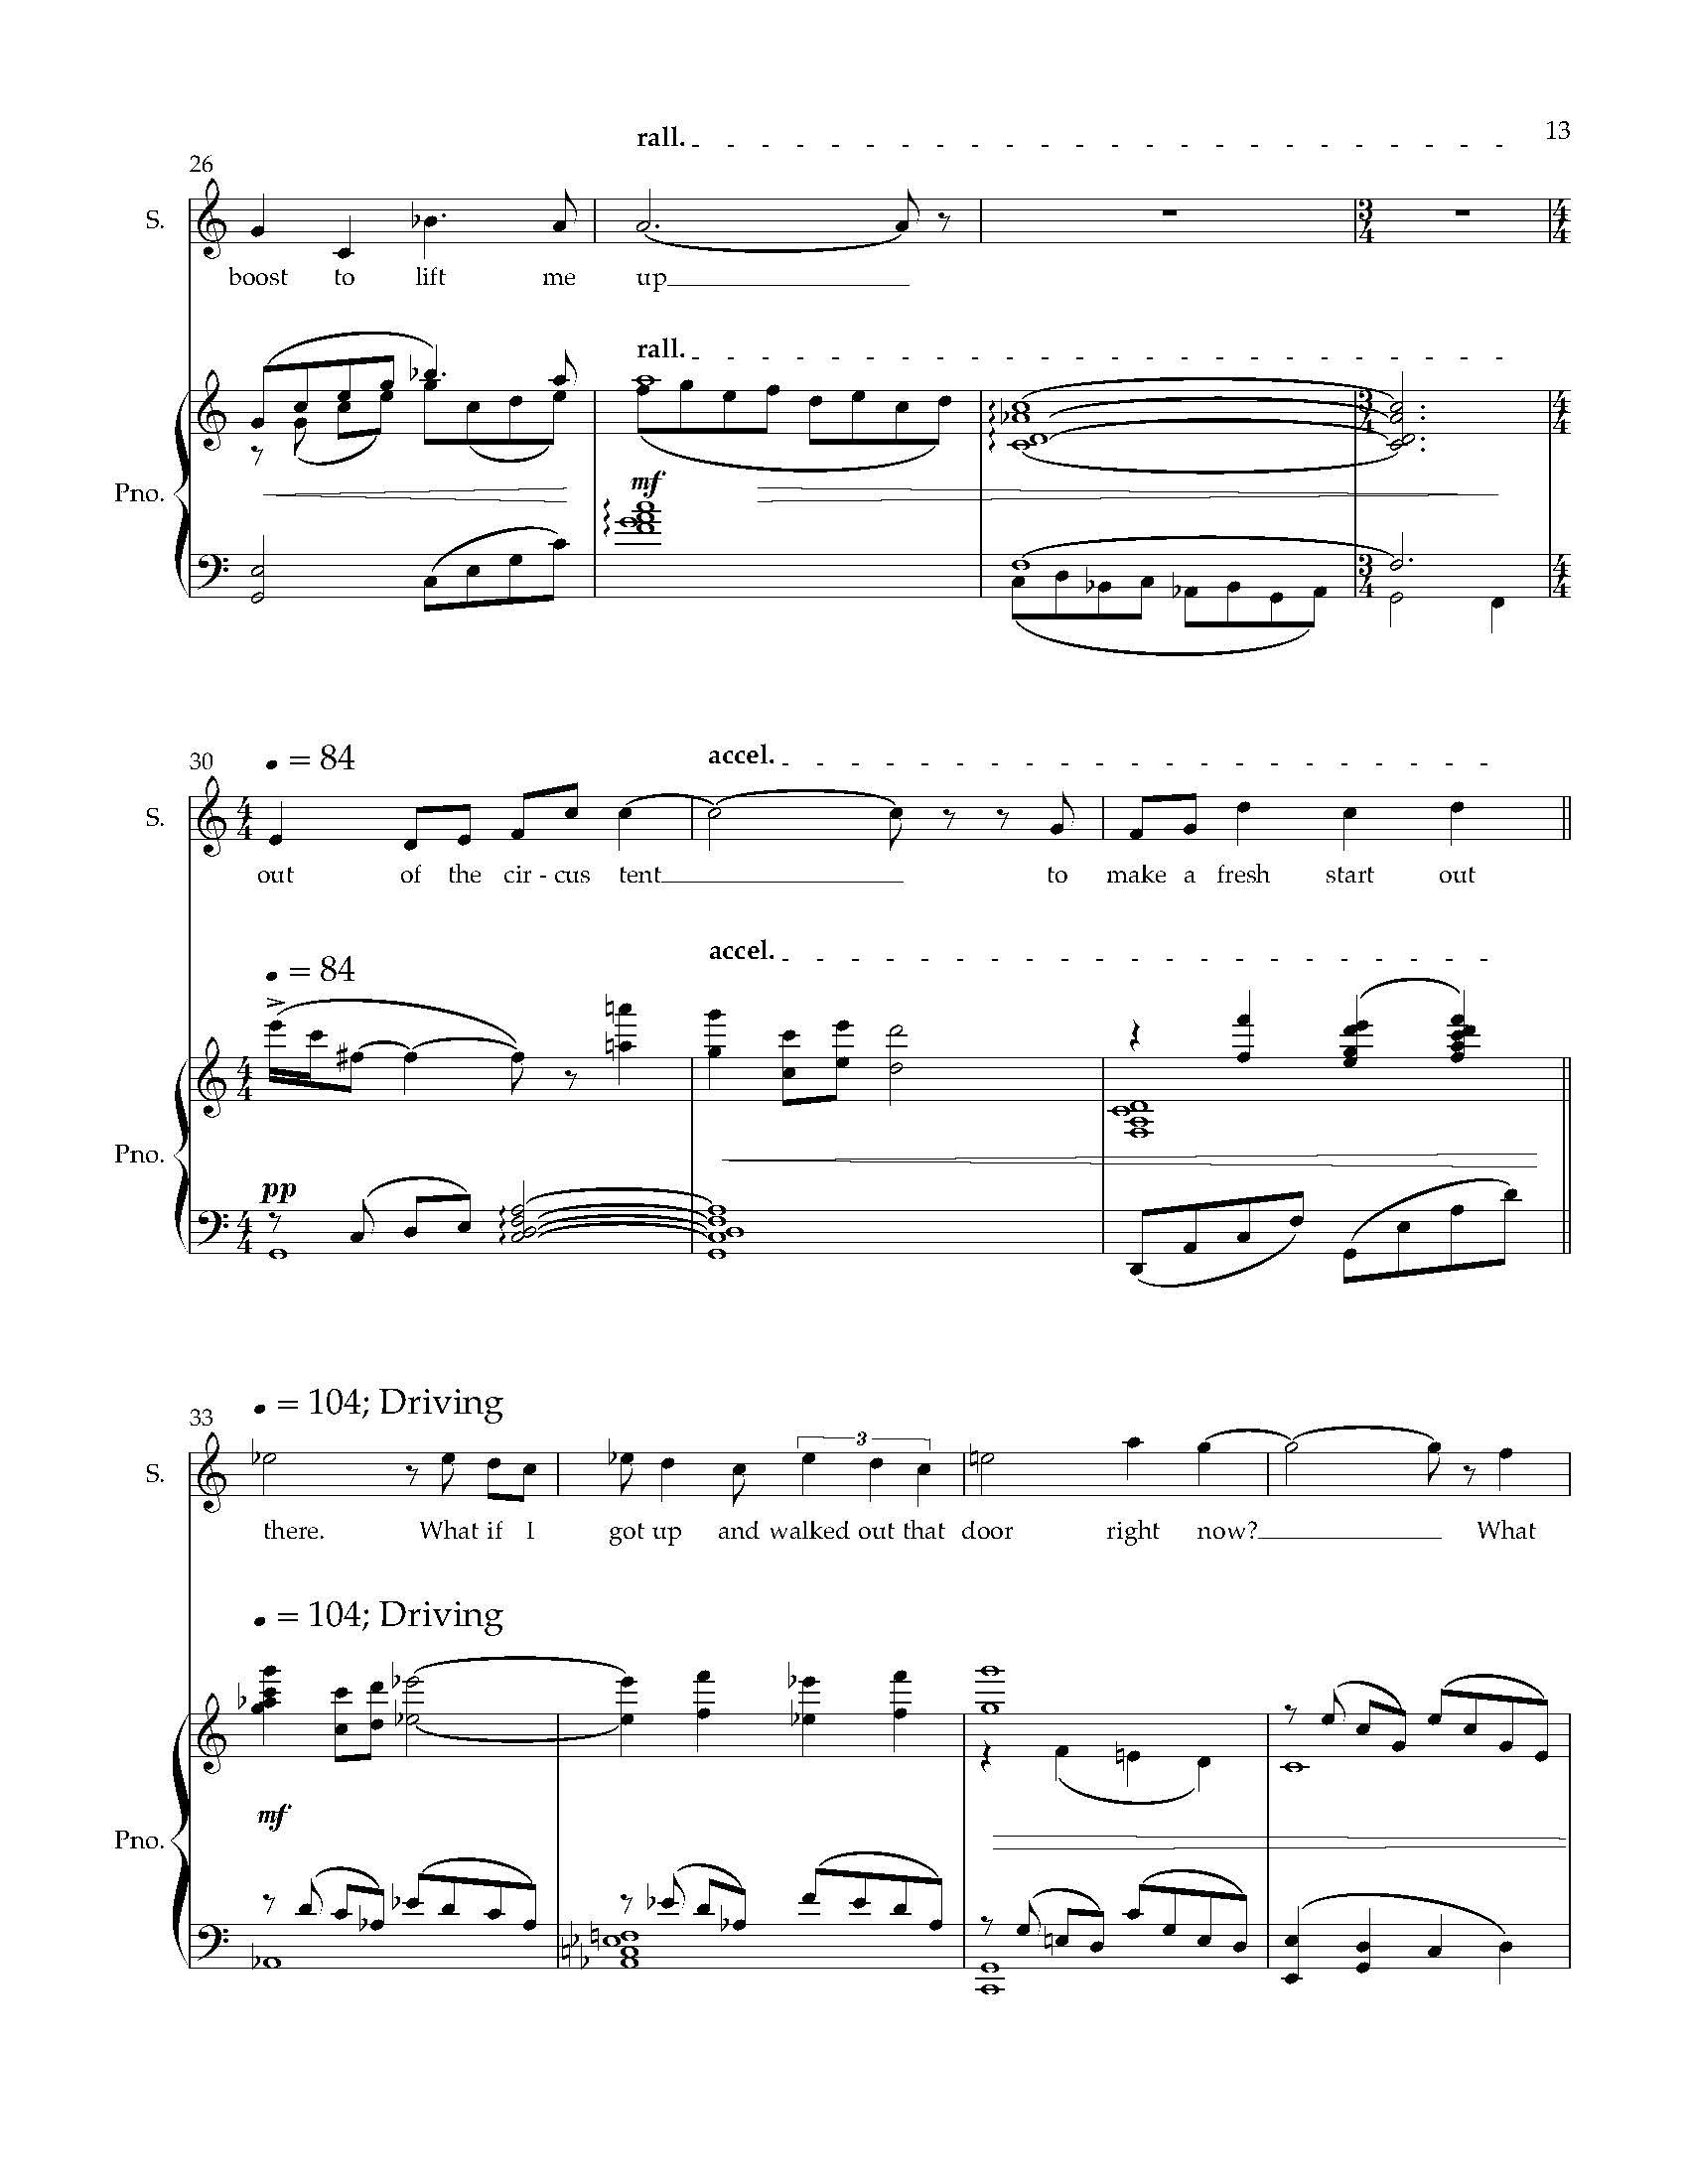 Five Arias from HWGS - Complete Score (1)_Page_17.jpg